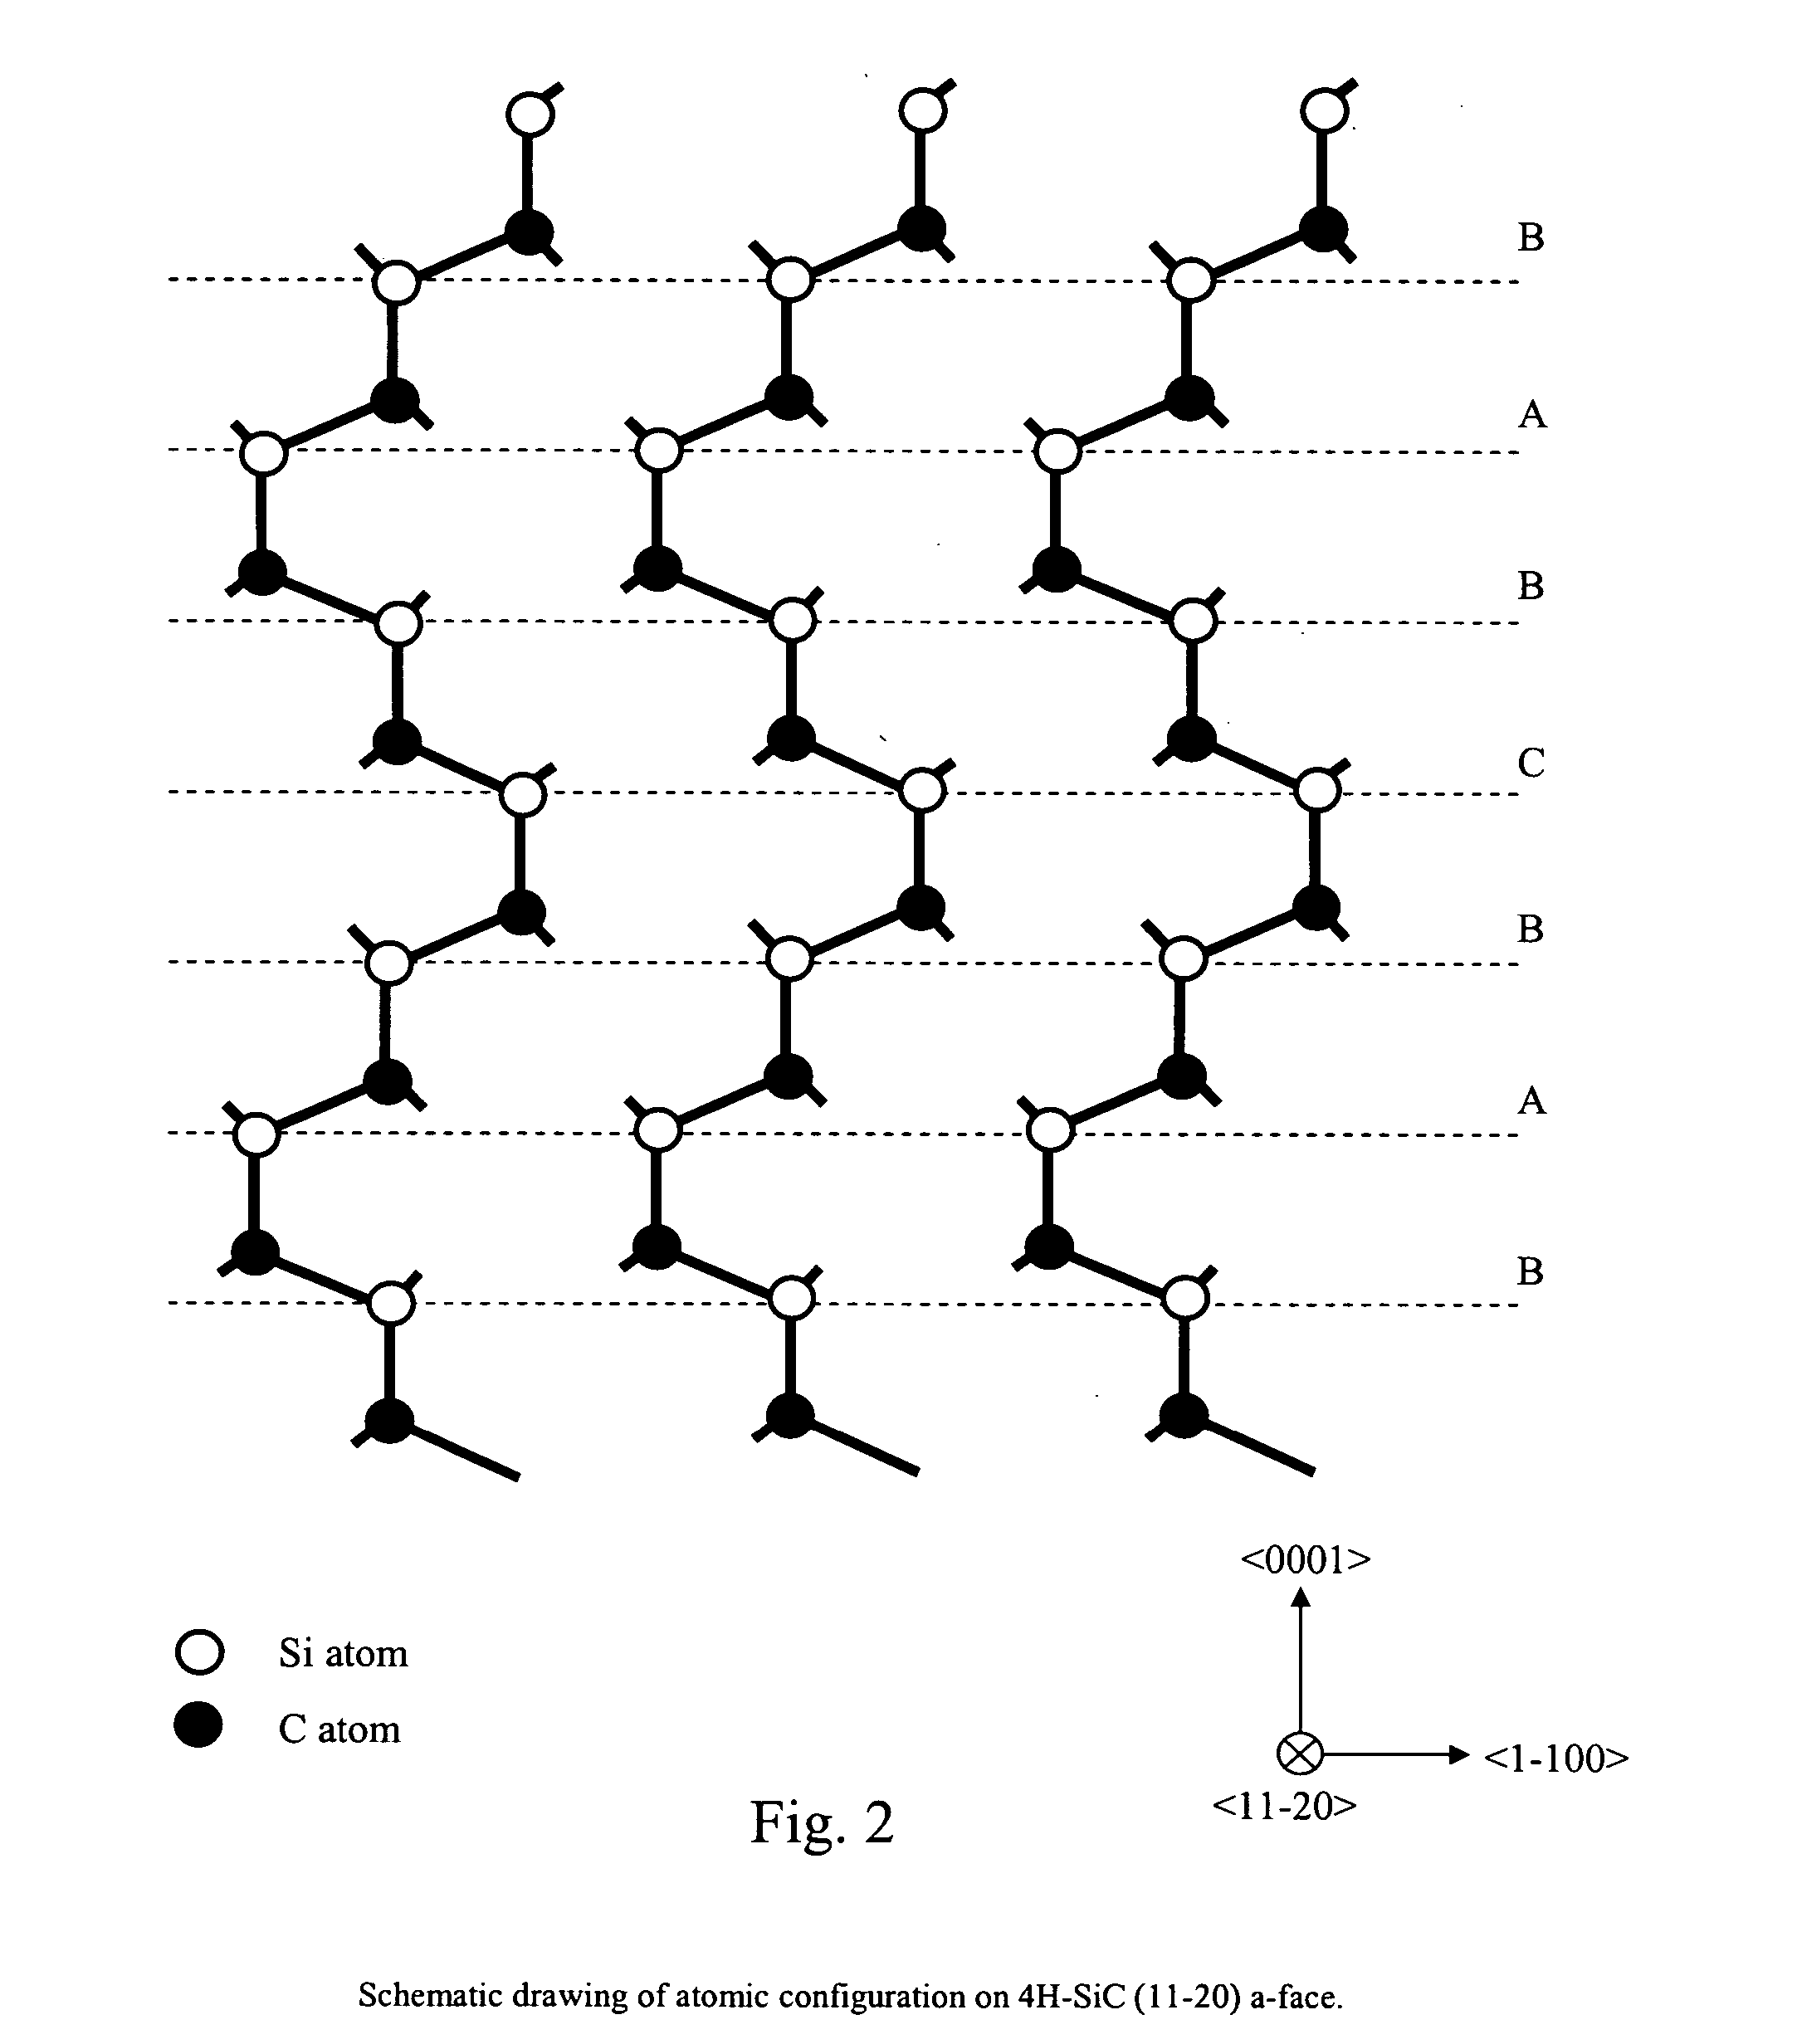 4H-polytype gallium nitride-based semiconductor device on a 4H-polytype substrate